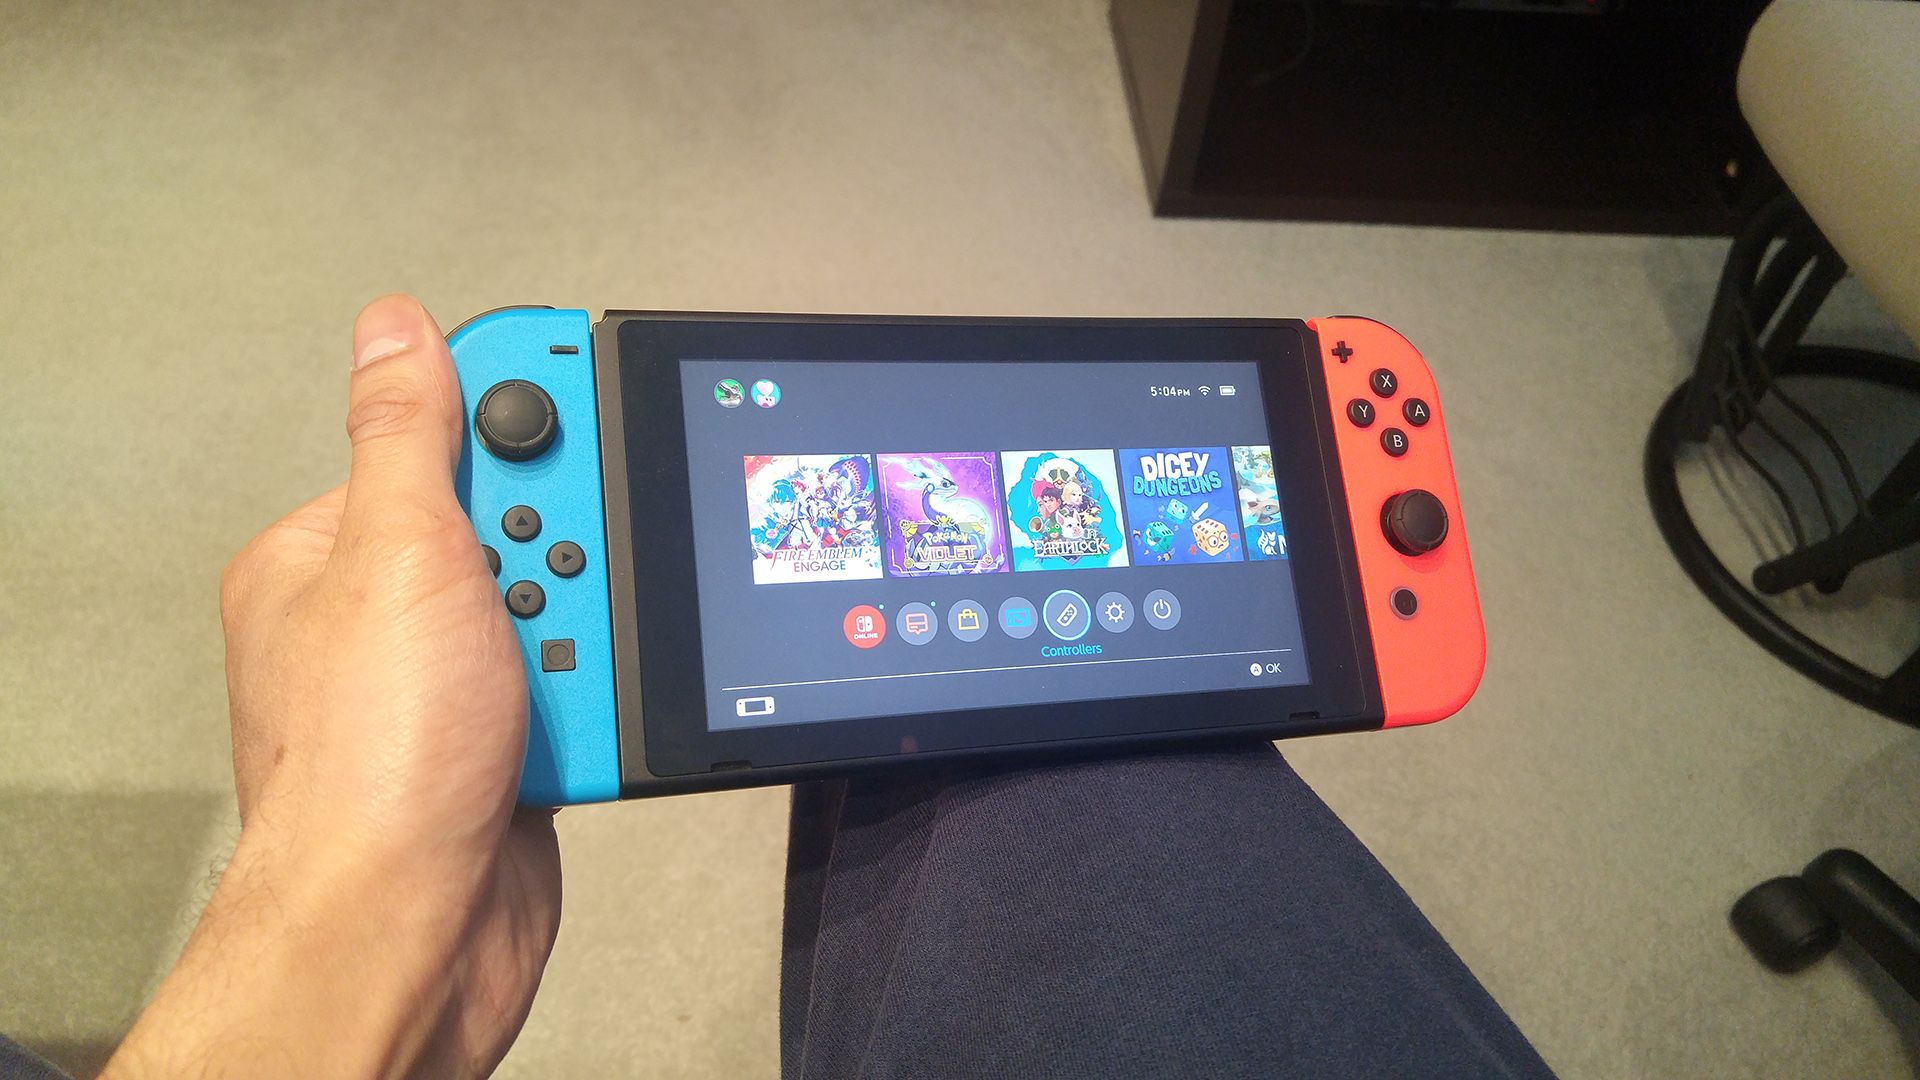 A Nintendo Switch with two Joy-Cons attached to it.